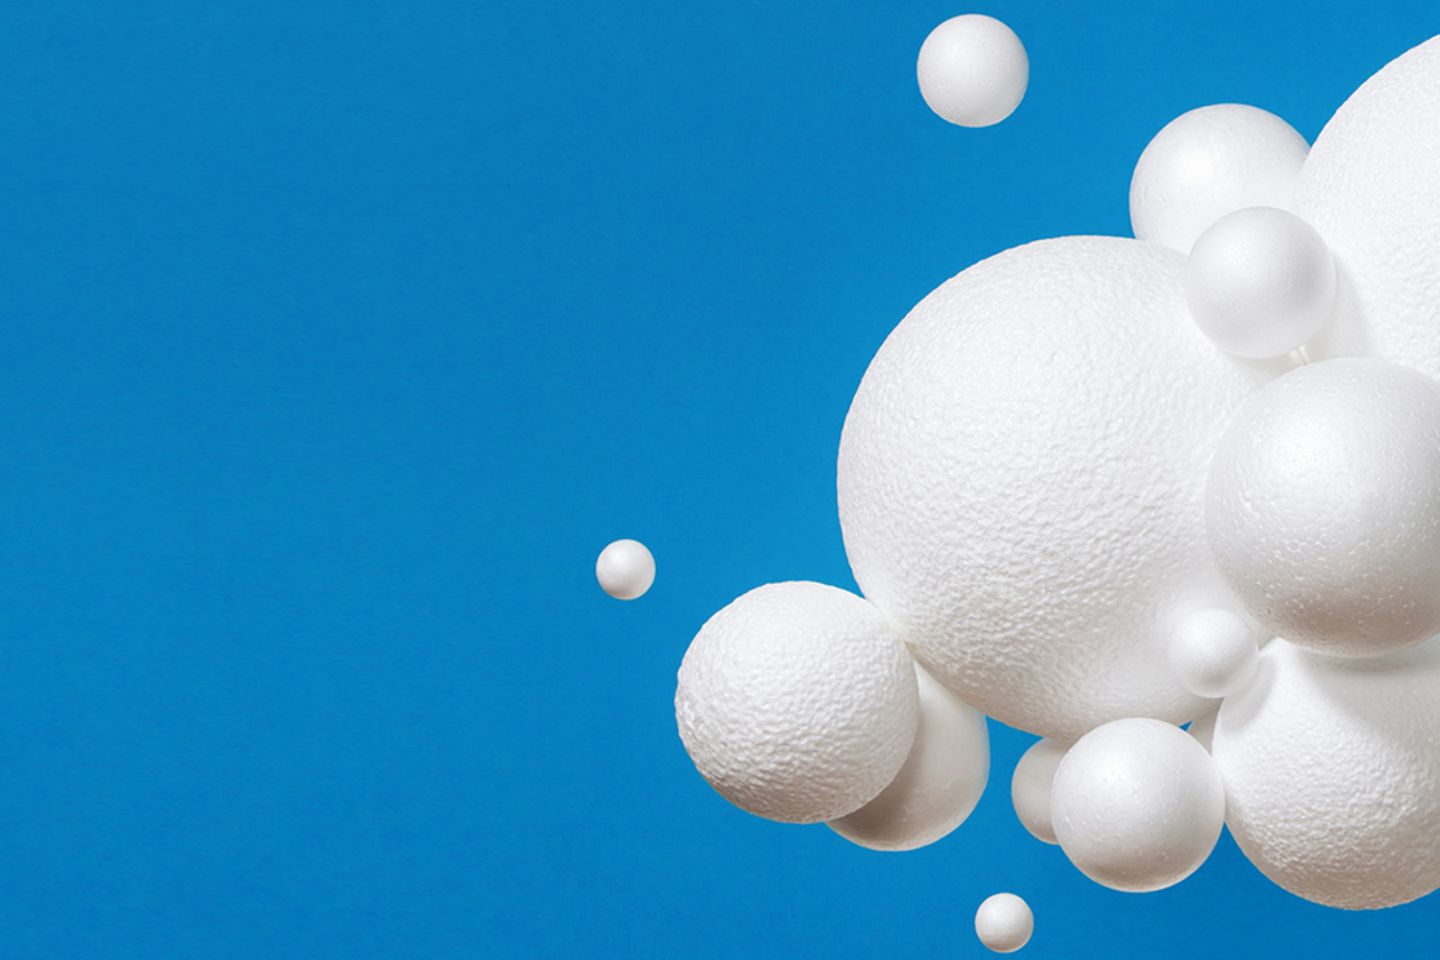 Picture of an artificial cloud in front of a blue background, composed of white spheres of different sizes.